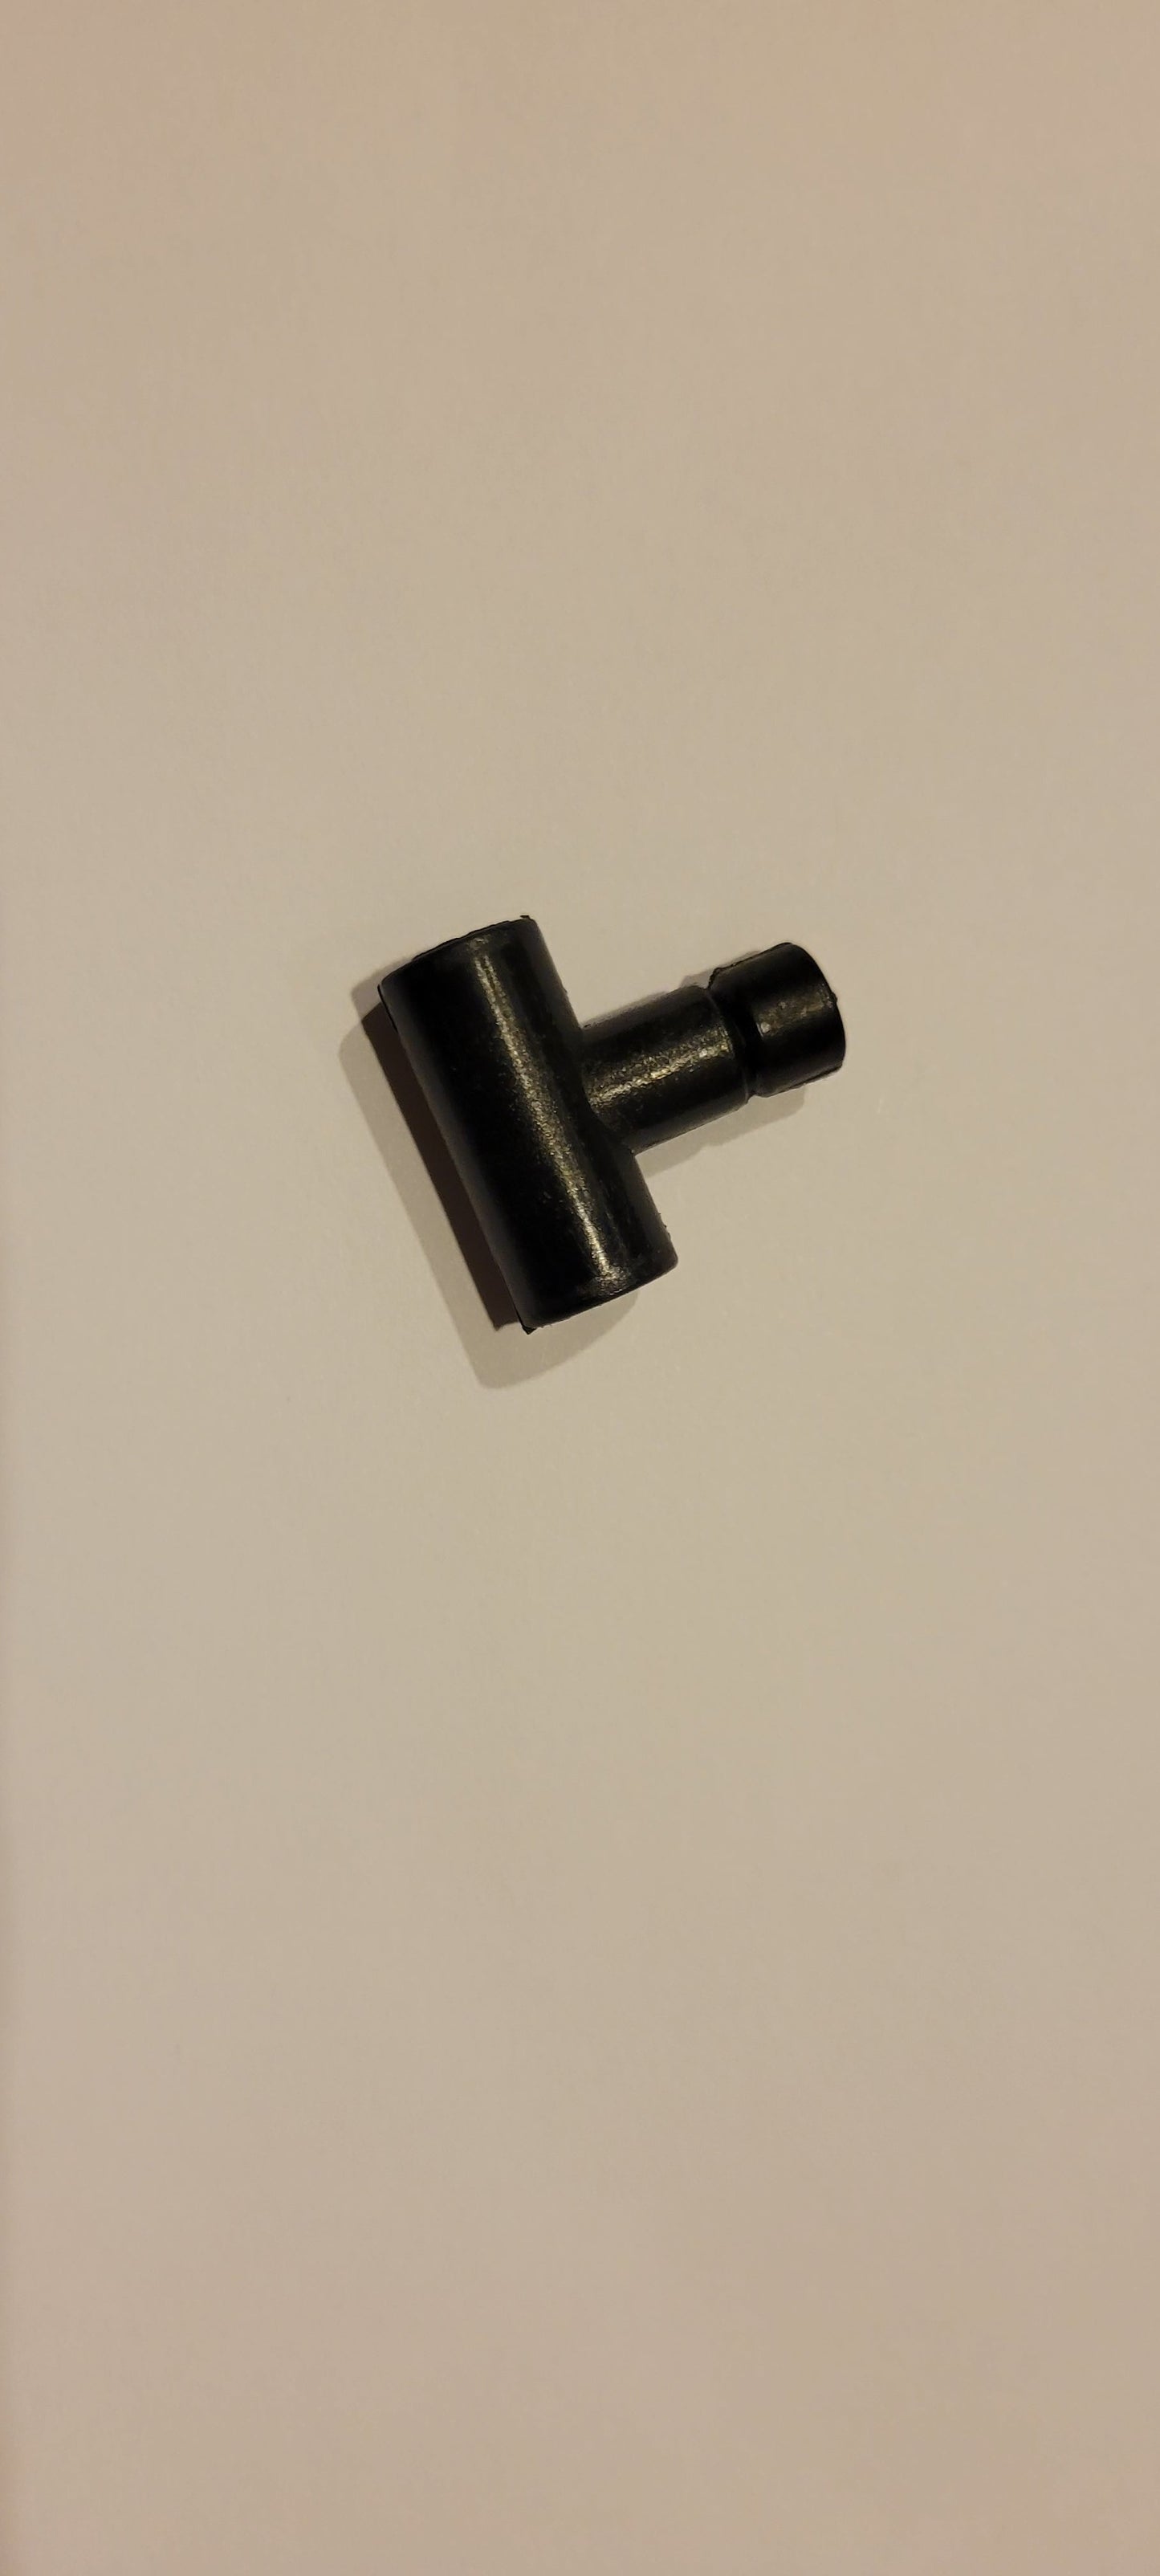 T-Bolts for parking barrier gate arms Sample(2 pieces)